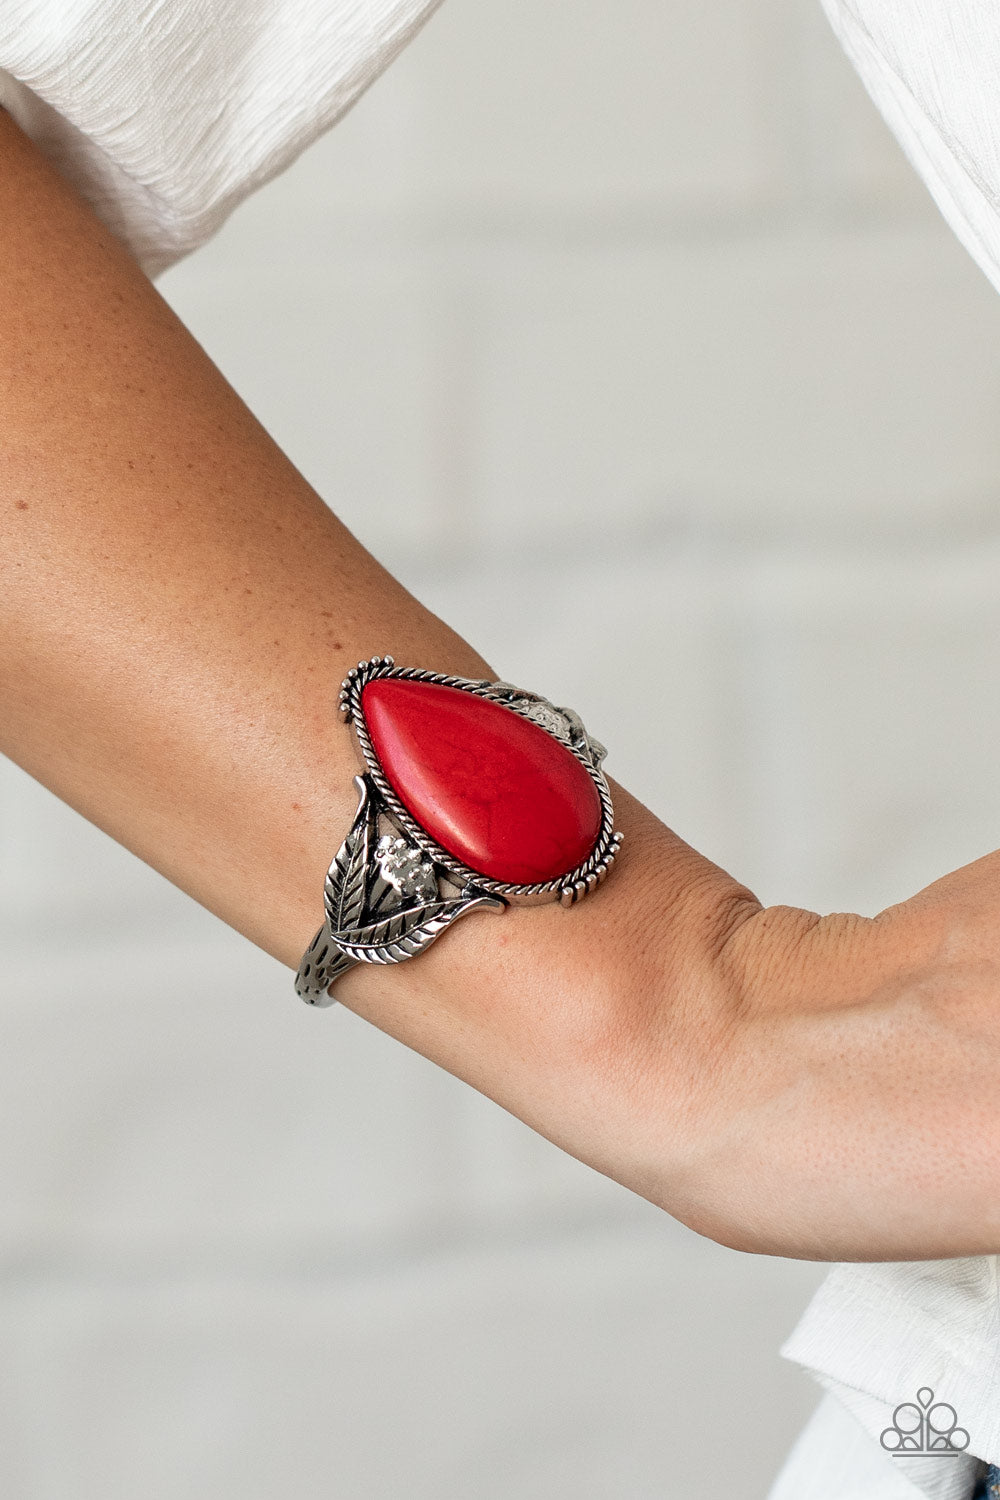 Blooming Oasis - Red Stone Cuff Bracelet - Princess Glam Shop